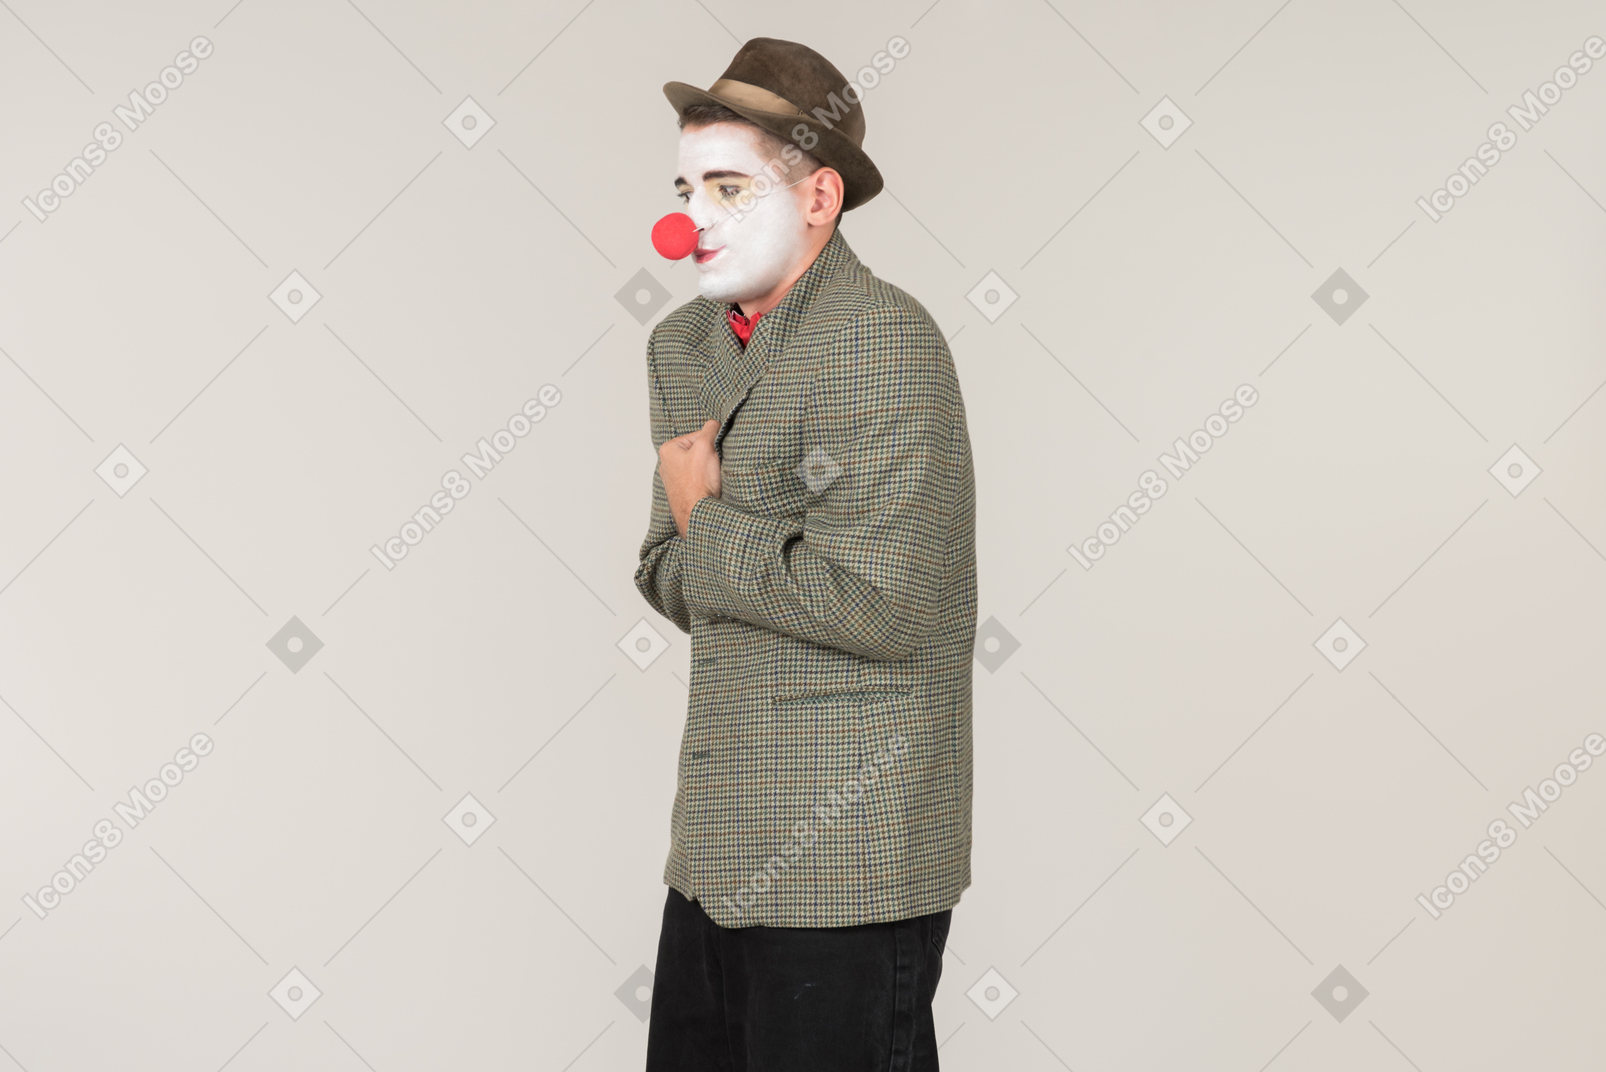 Male clown standing half sideways and wrapping up in jacket